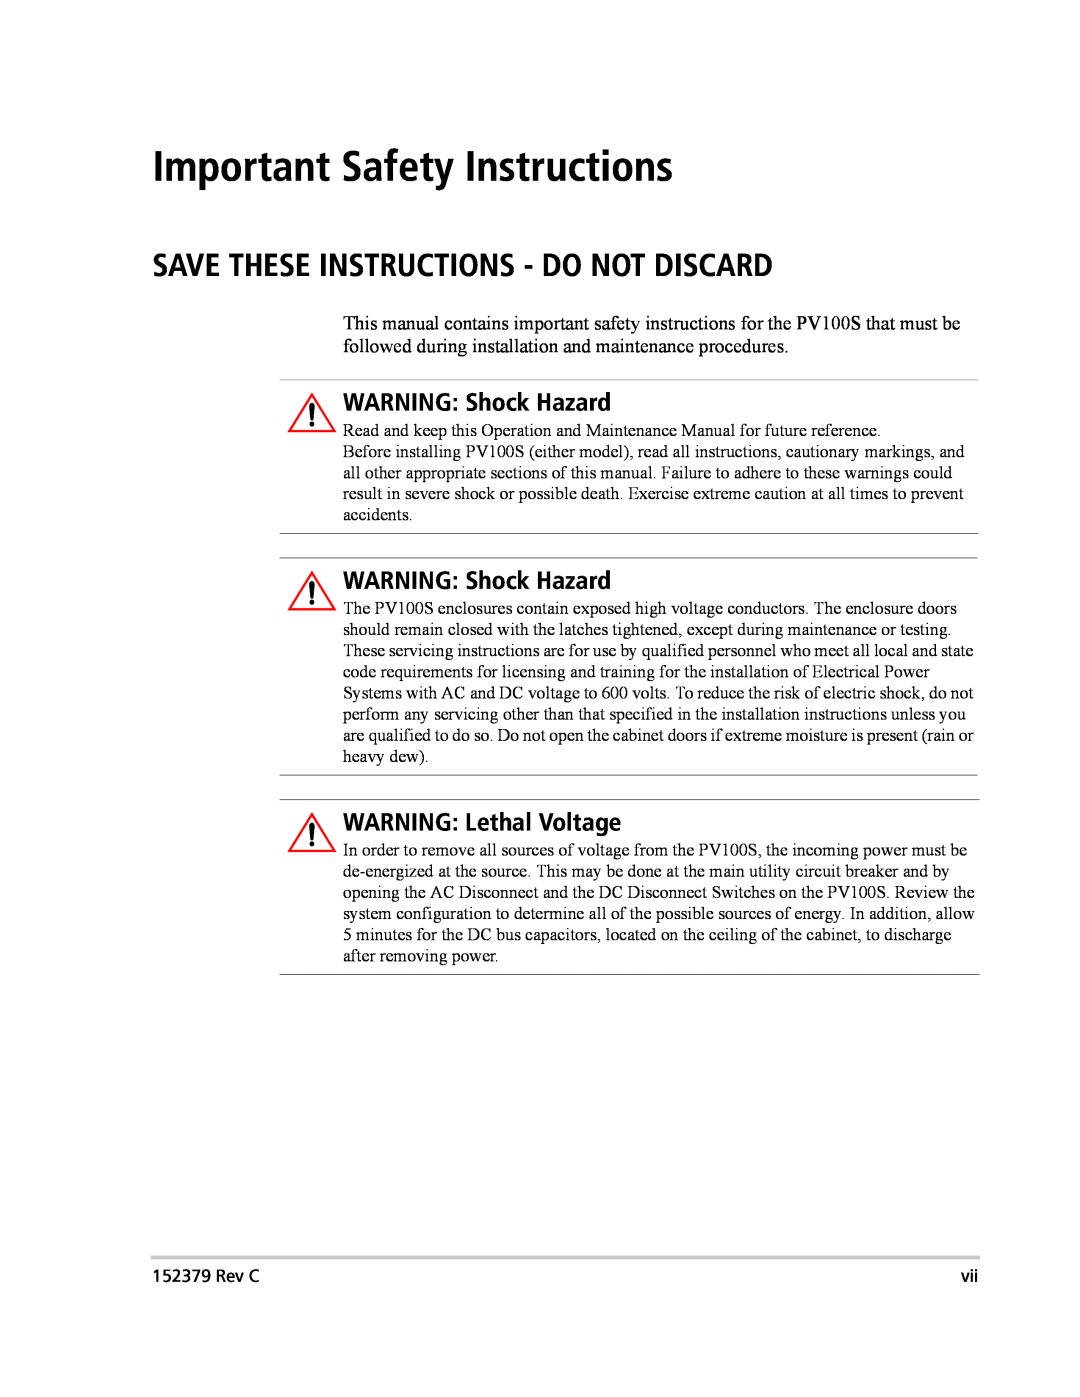 Xantrex Technology PV100S-208 manual Important Safety Instructions, Save These Instructions - Do Not Discard 